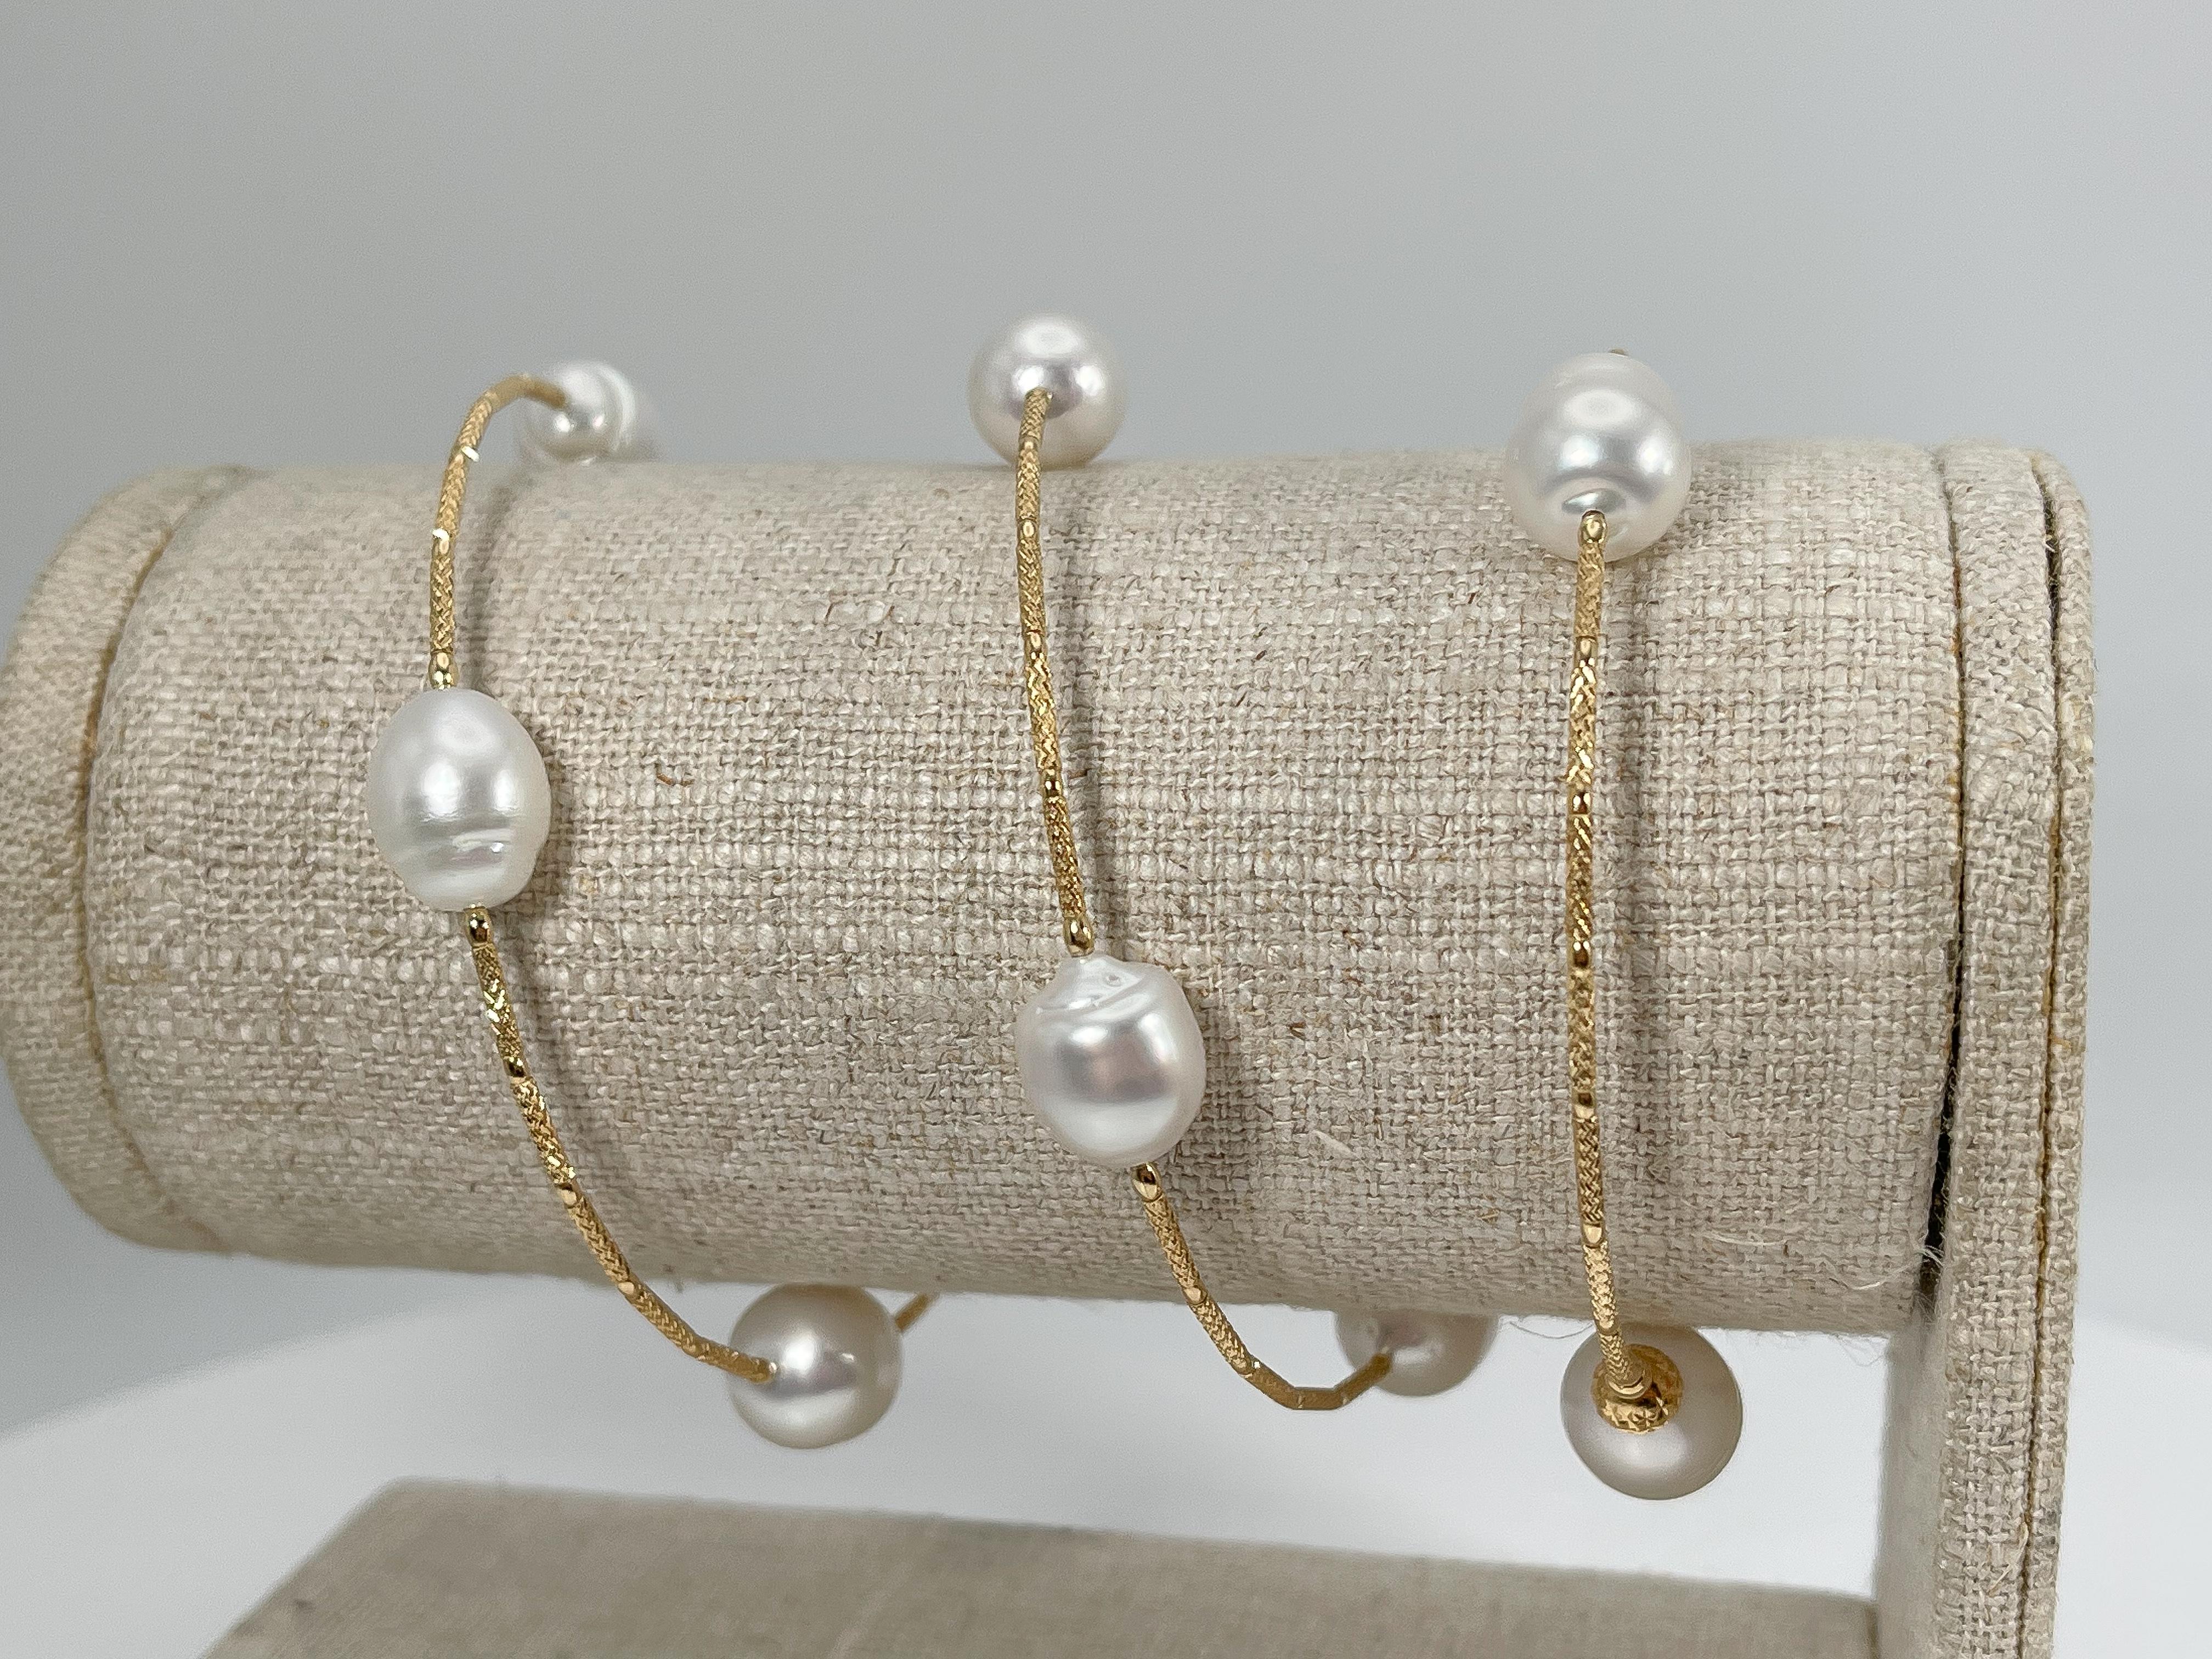 18k yellow gold wire cable white pearl bracelet. This bracelet will stretch to fit almost anyone, the width of the pearls is 9 mm, and it has a total weight of 20.86.